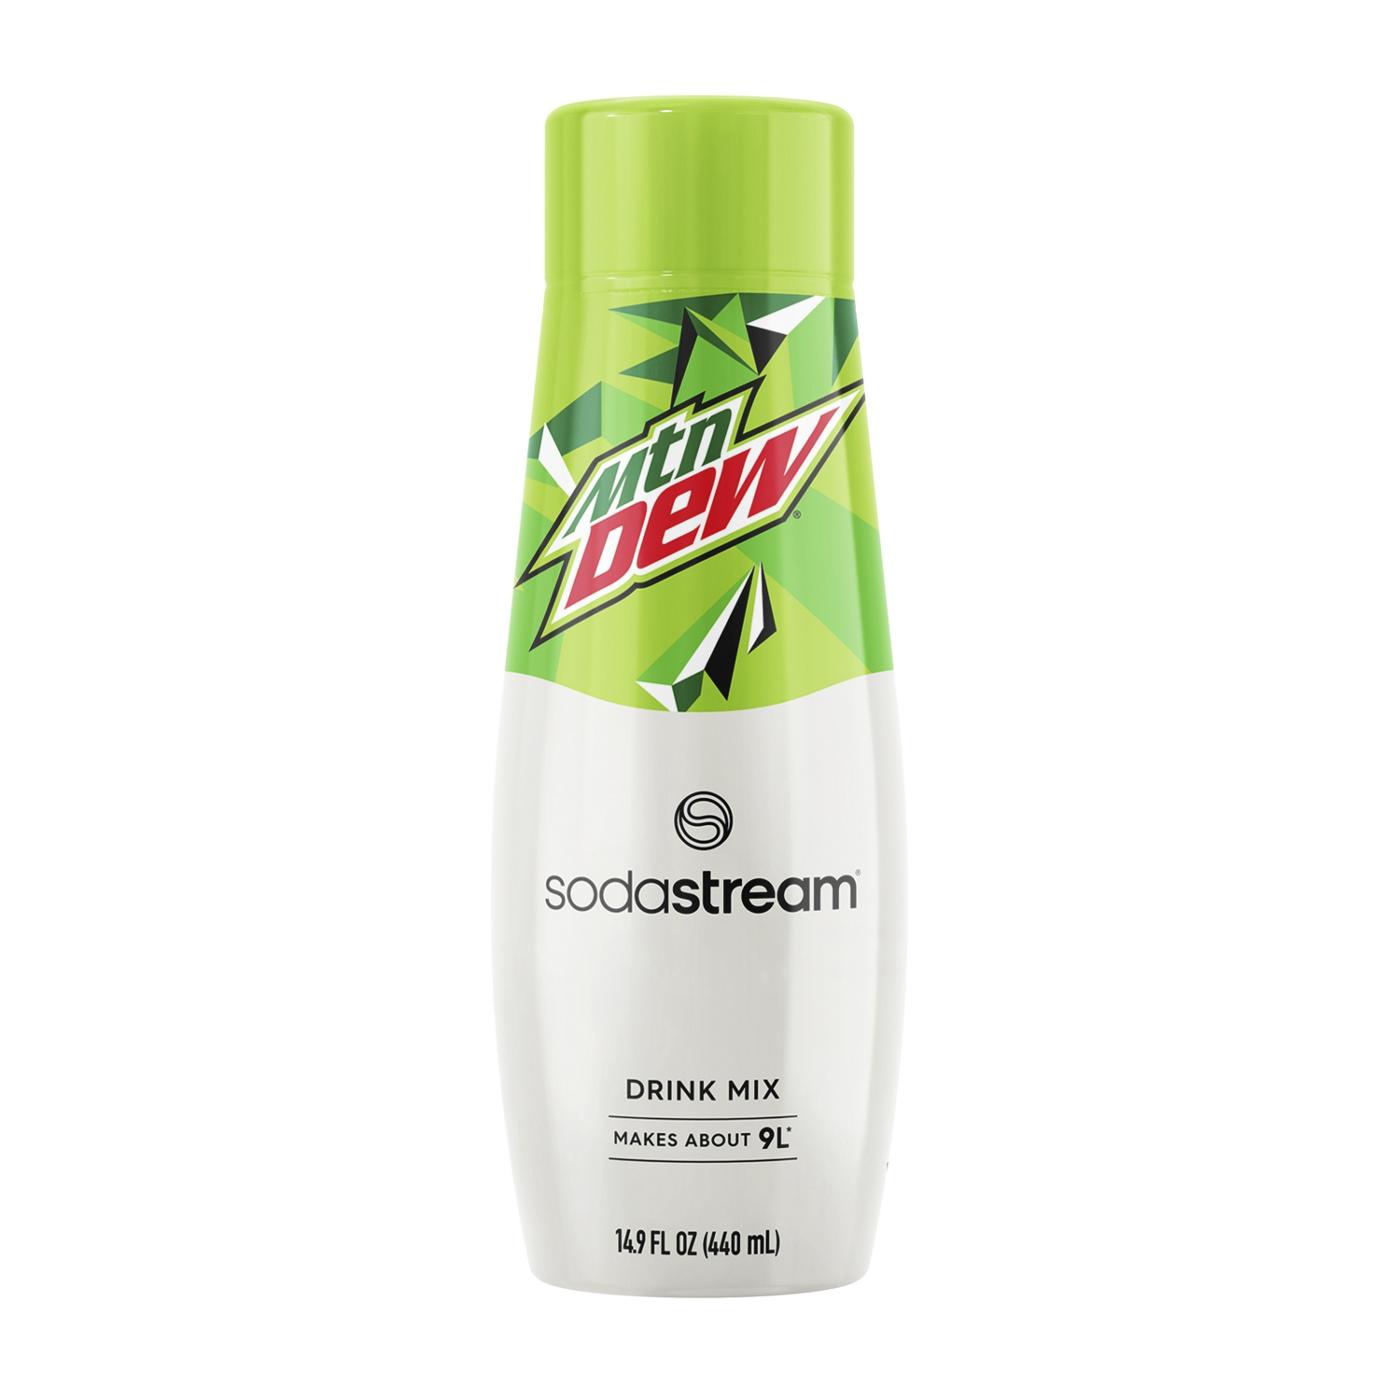 SodaStream Mountain Dew Drink Mix; image 1 of 4